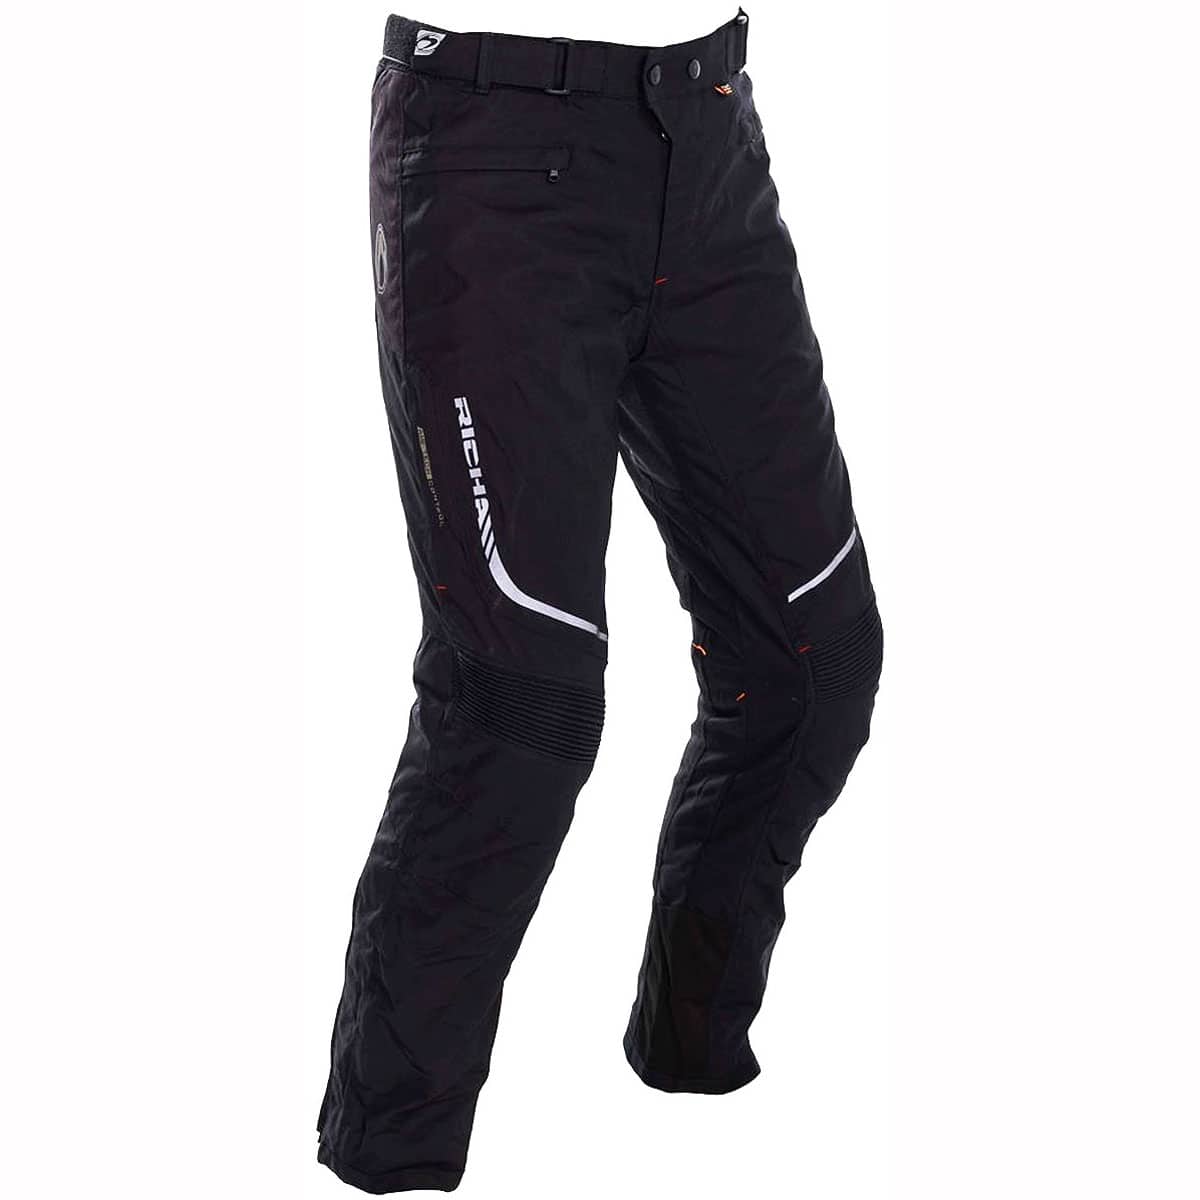 Waterproof ladies textile motorcycle trousers from Richa with D3O armour - front